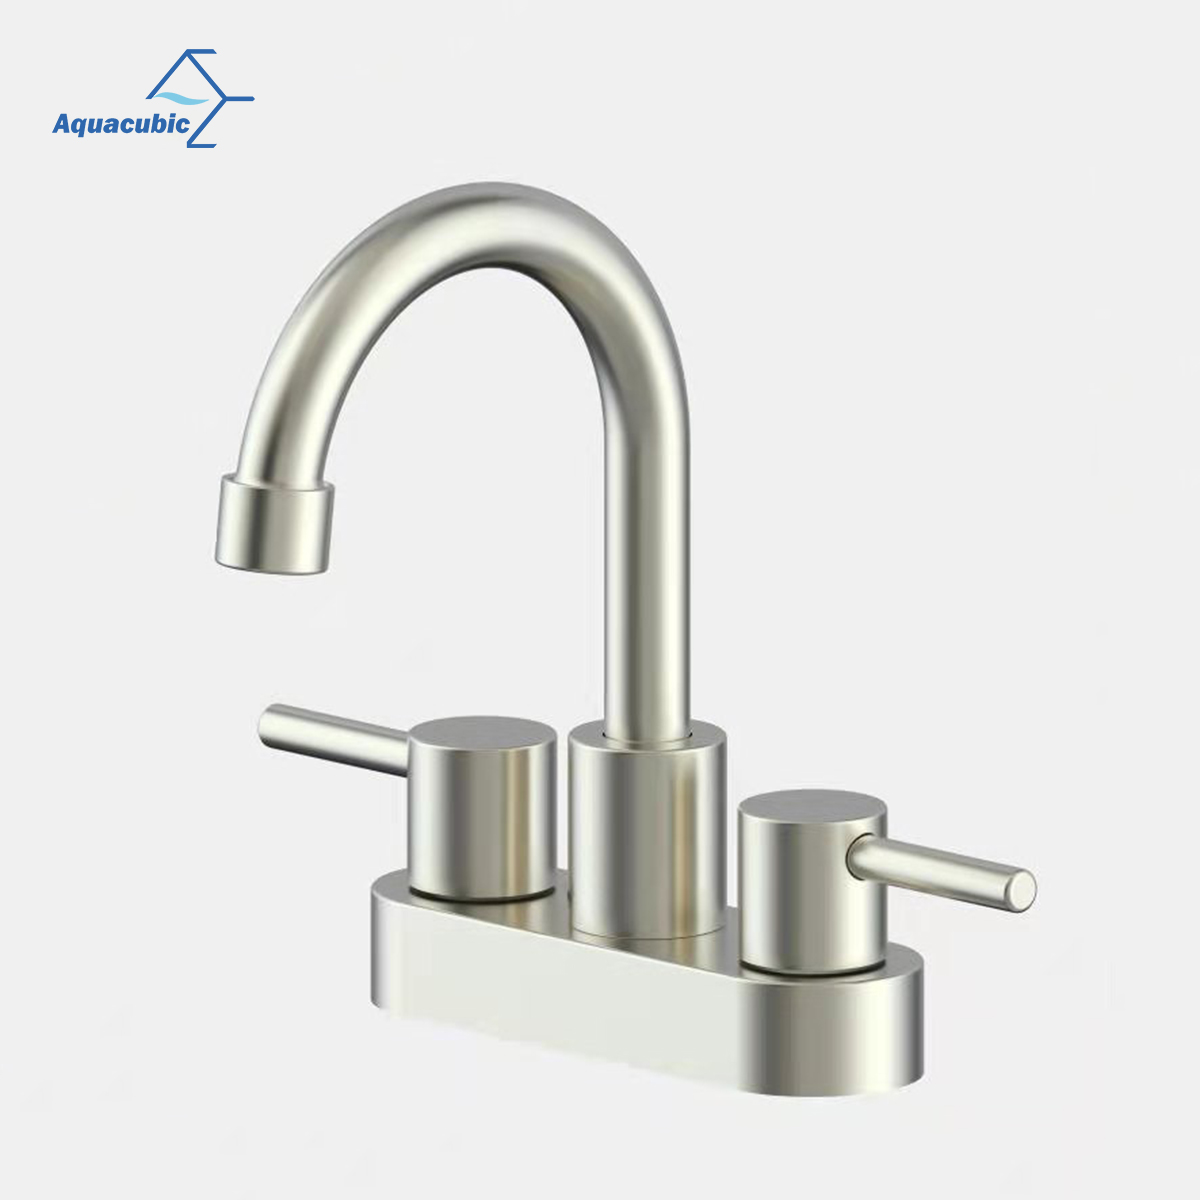 Double Handle Sanitary Hot and Cold Water Centerset Faucet